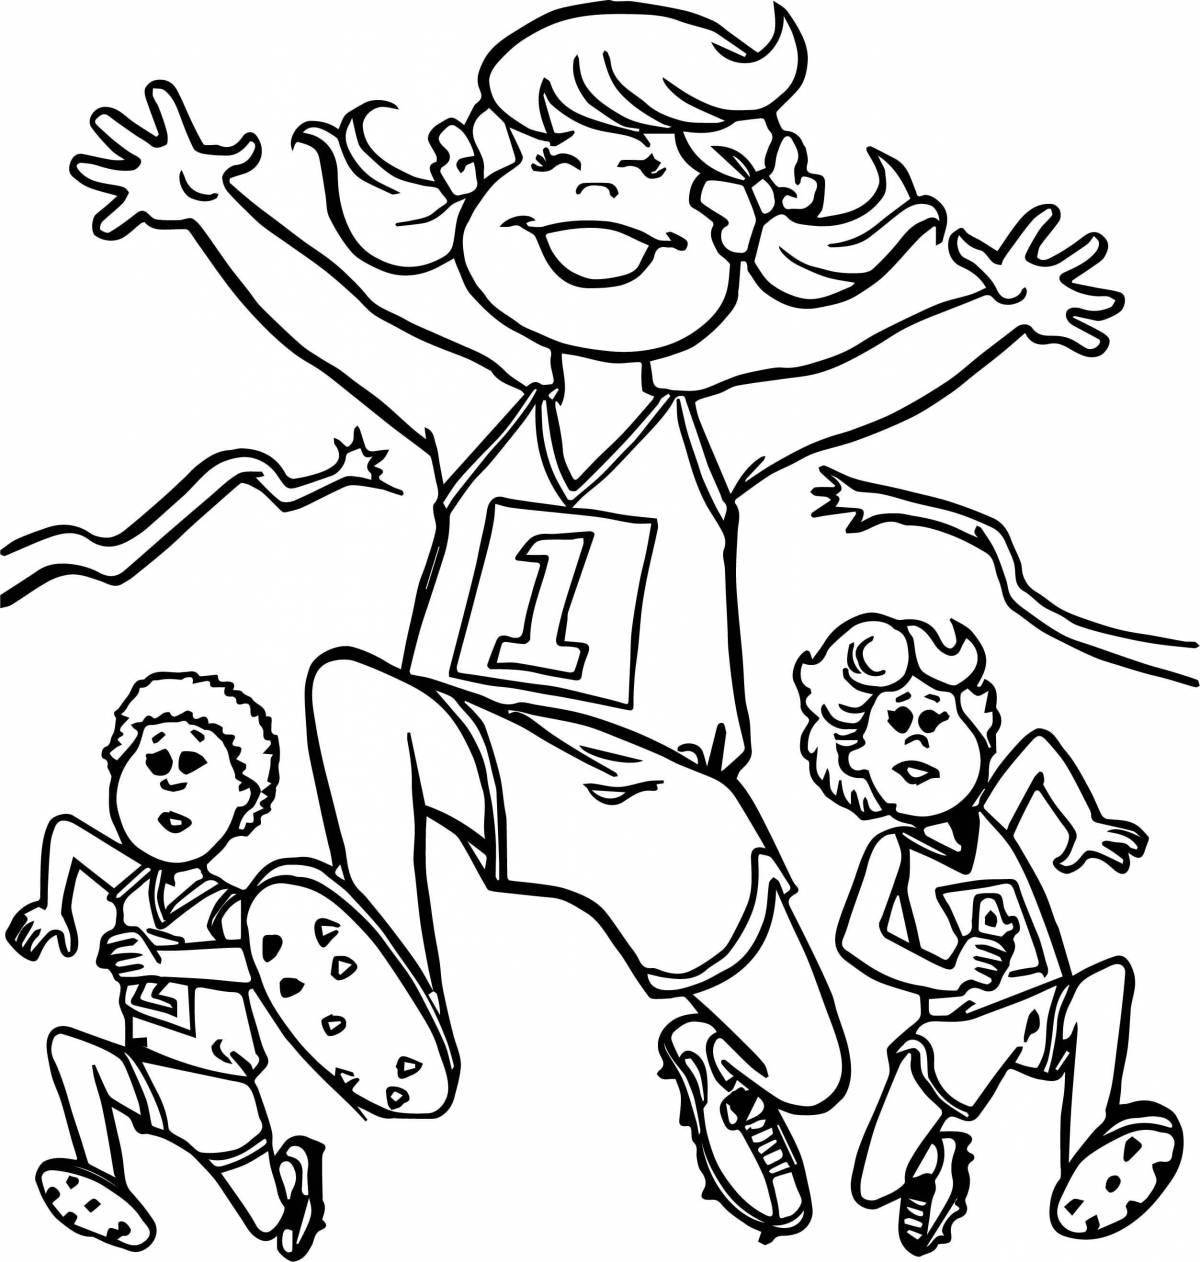 Coloring page running boy